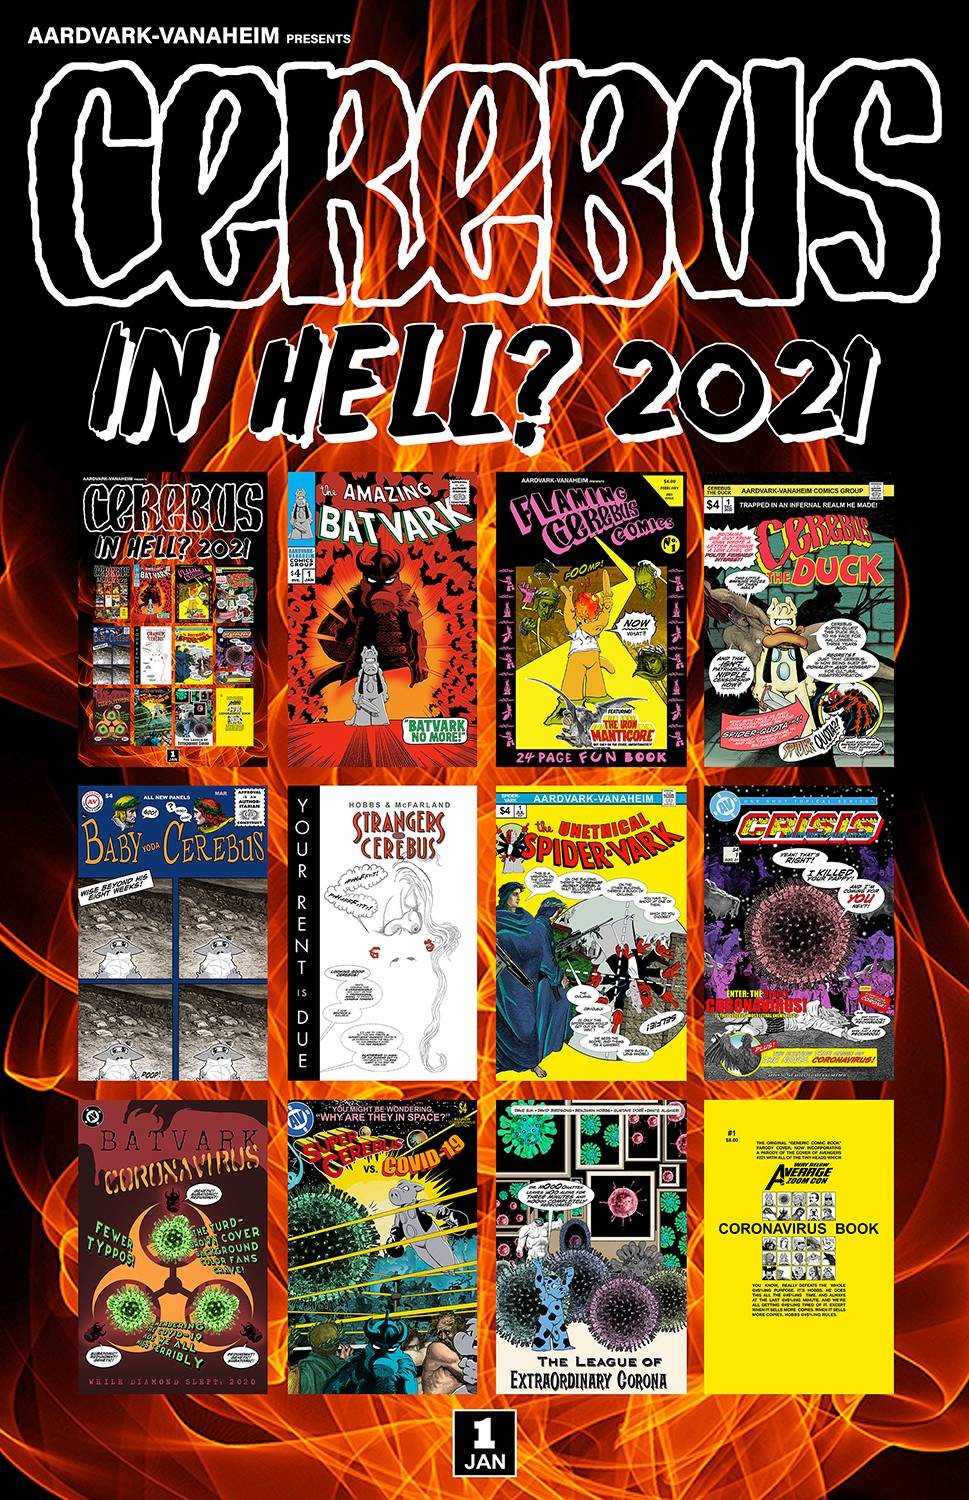 Cerebus In Hell? 2021 #1